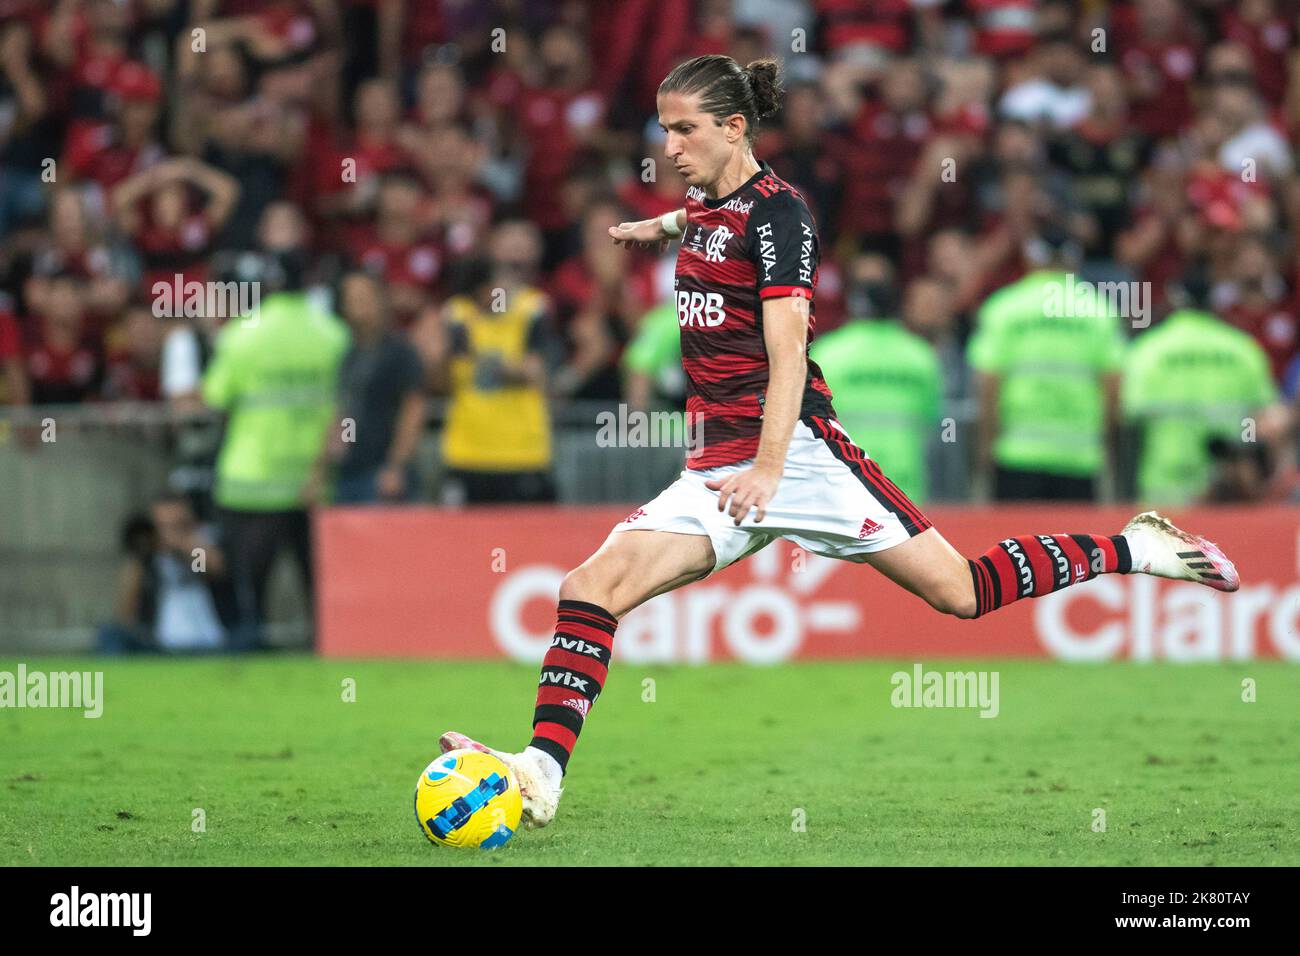 Rio, Brazil - October 19, 2022: Filipe Luís player in match between Flamengo vs Corinthians by second match of final round of Brazilian Cup in Maracan Stock Photo